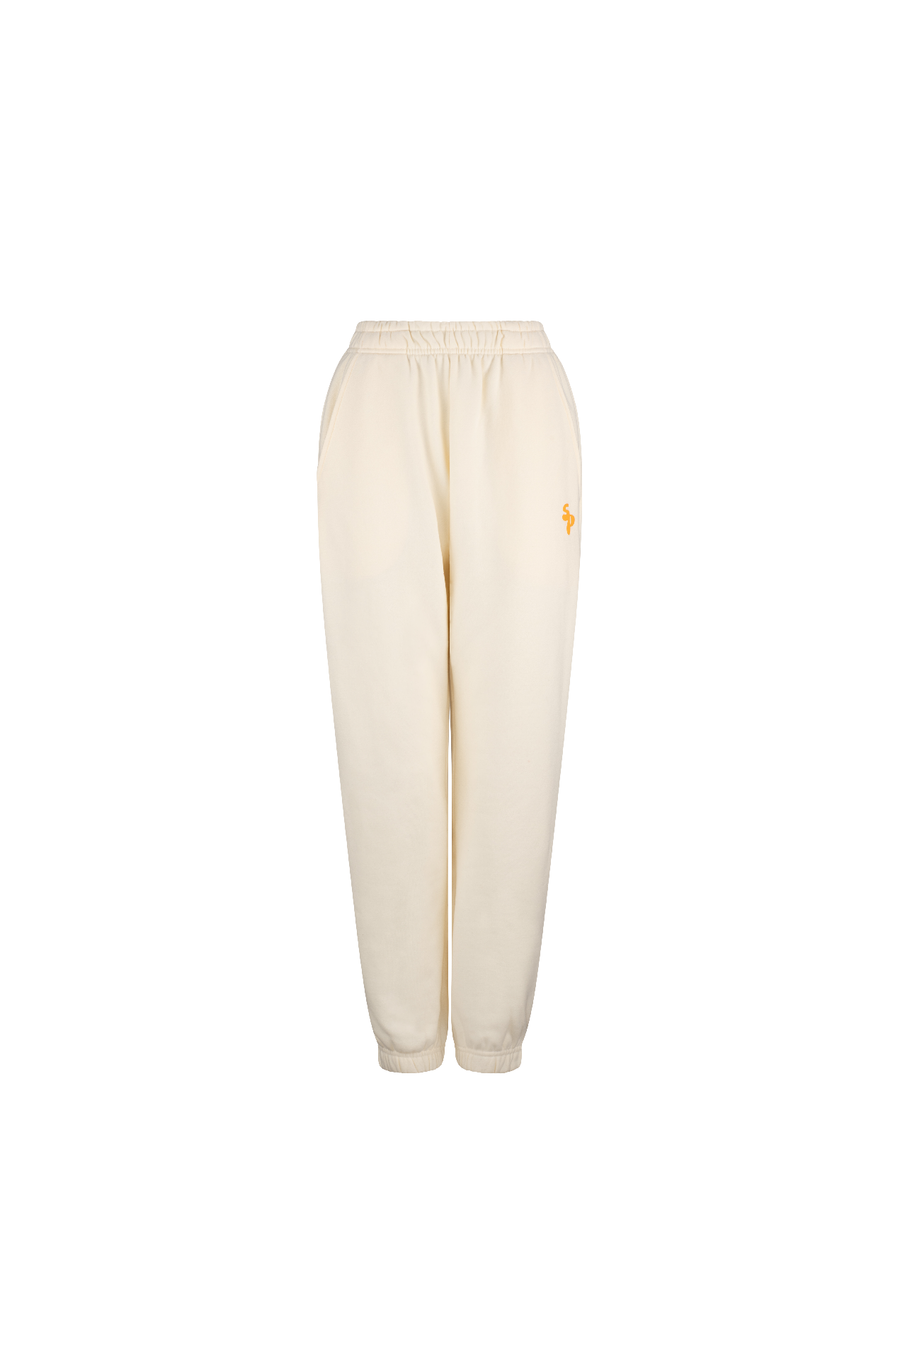 Paradiso Sweatpants in Butter